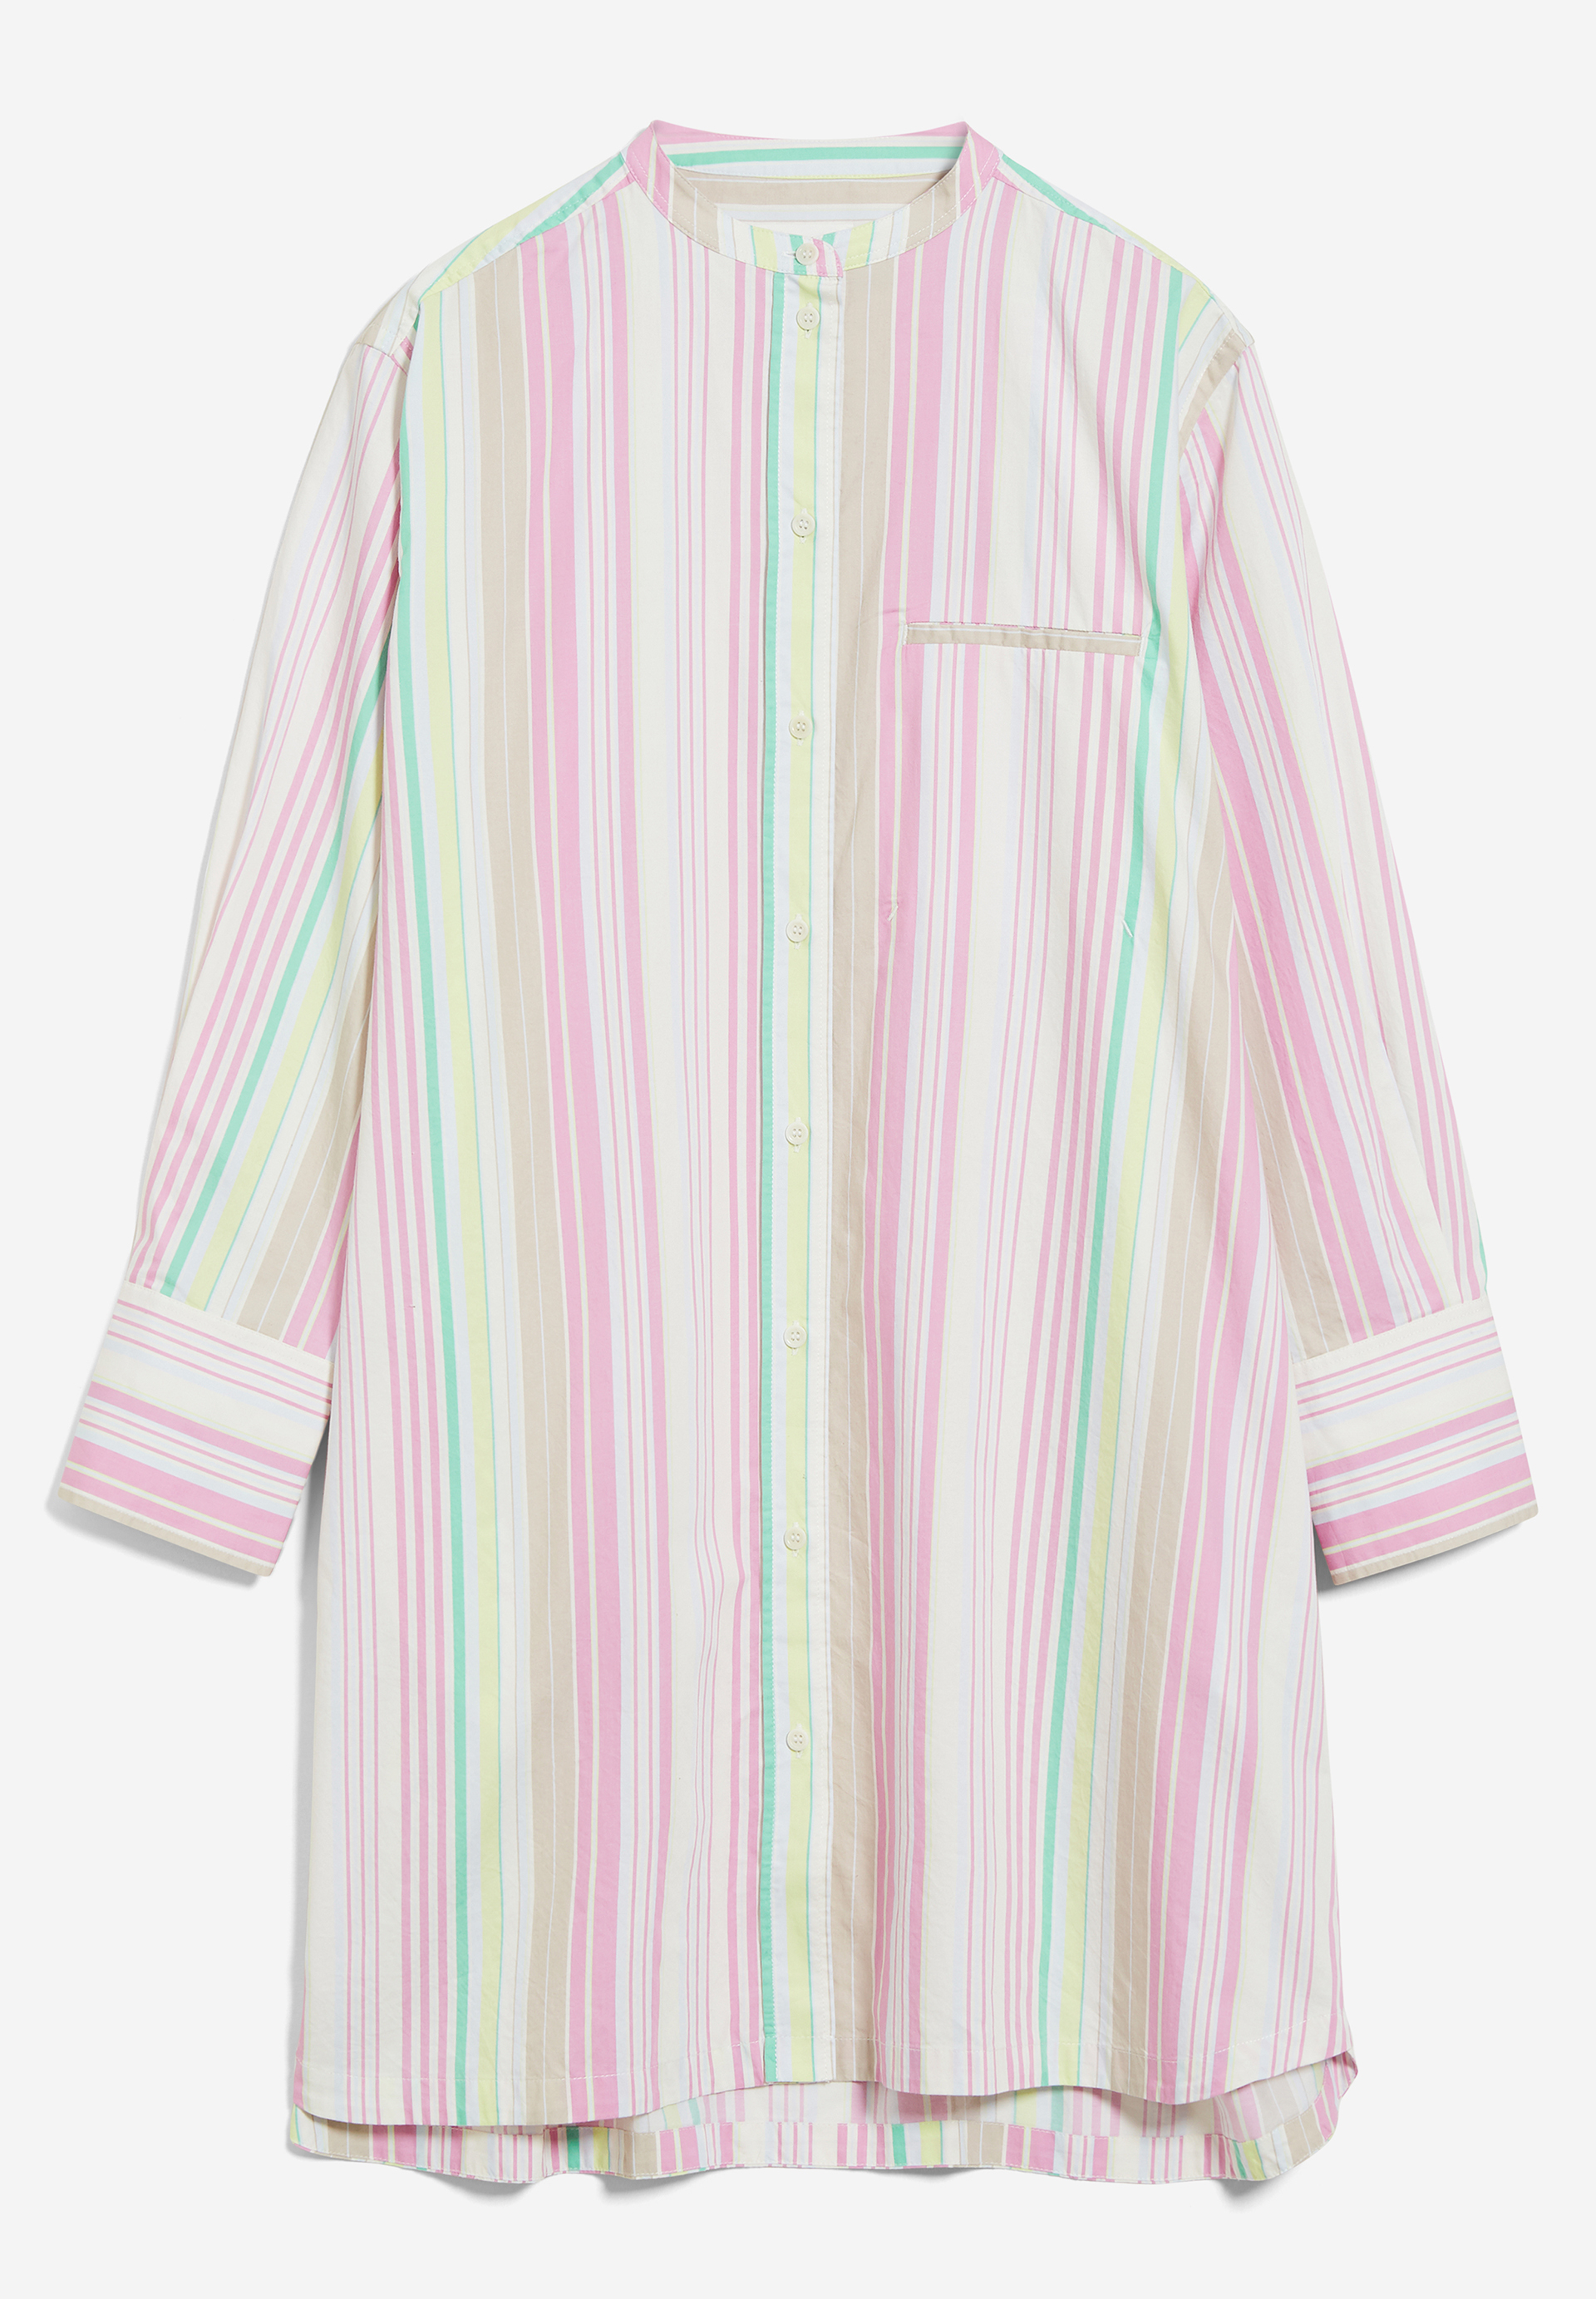 VAAJA STRIPES Woven Dress Relaxed Fit made of Organic Cotton